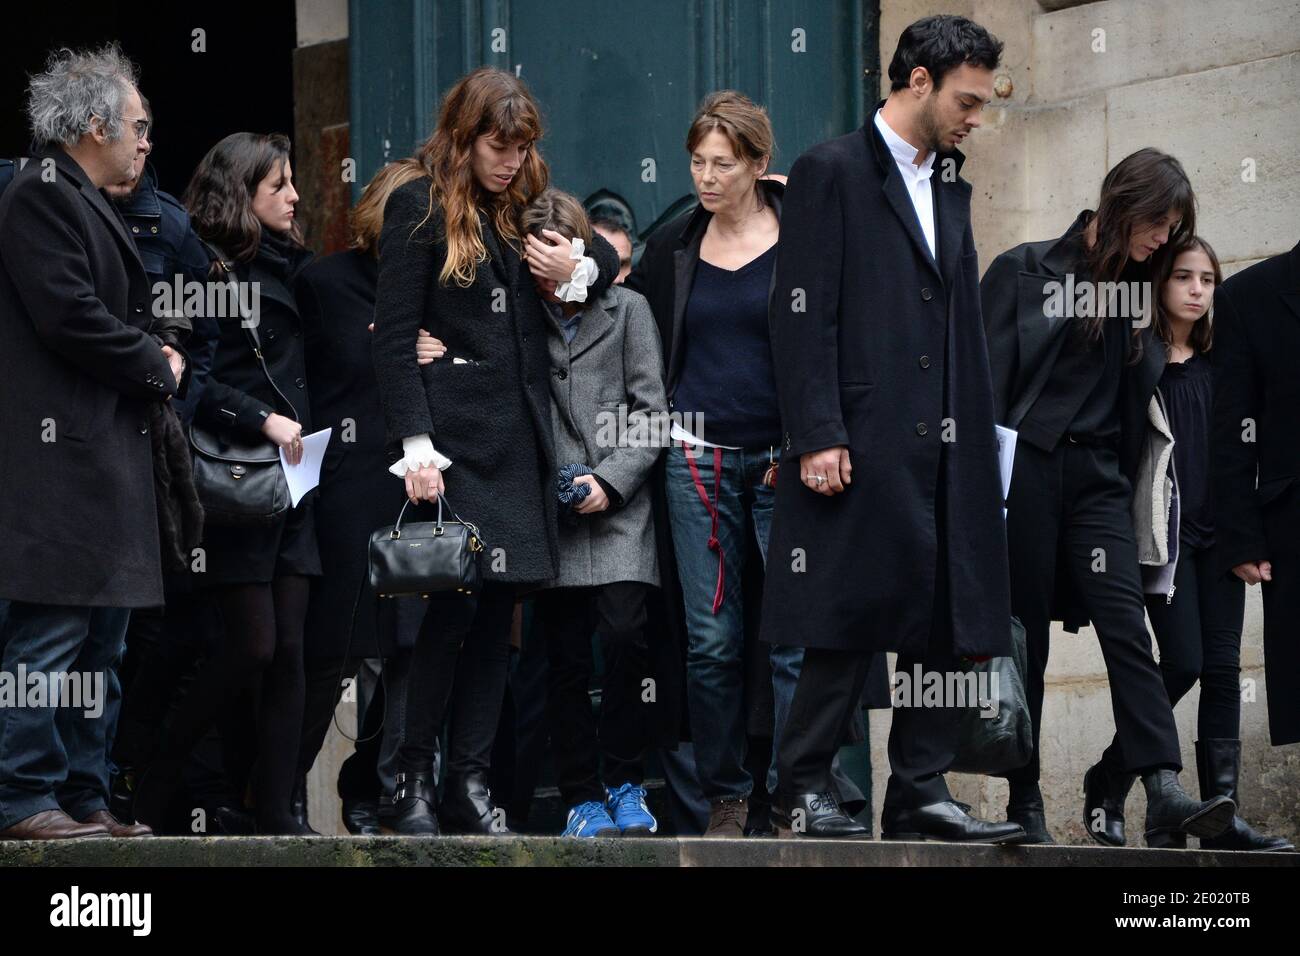 botanist Almindelig helgen Please hide the children's faces prior to the publication Lou Doillon and  her son Marlowe, Jane Birkin and Charlotte Gainsbourg and her daughter  Alice attending a tribute mass for Kate Barry held